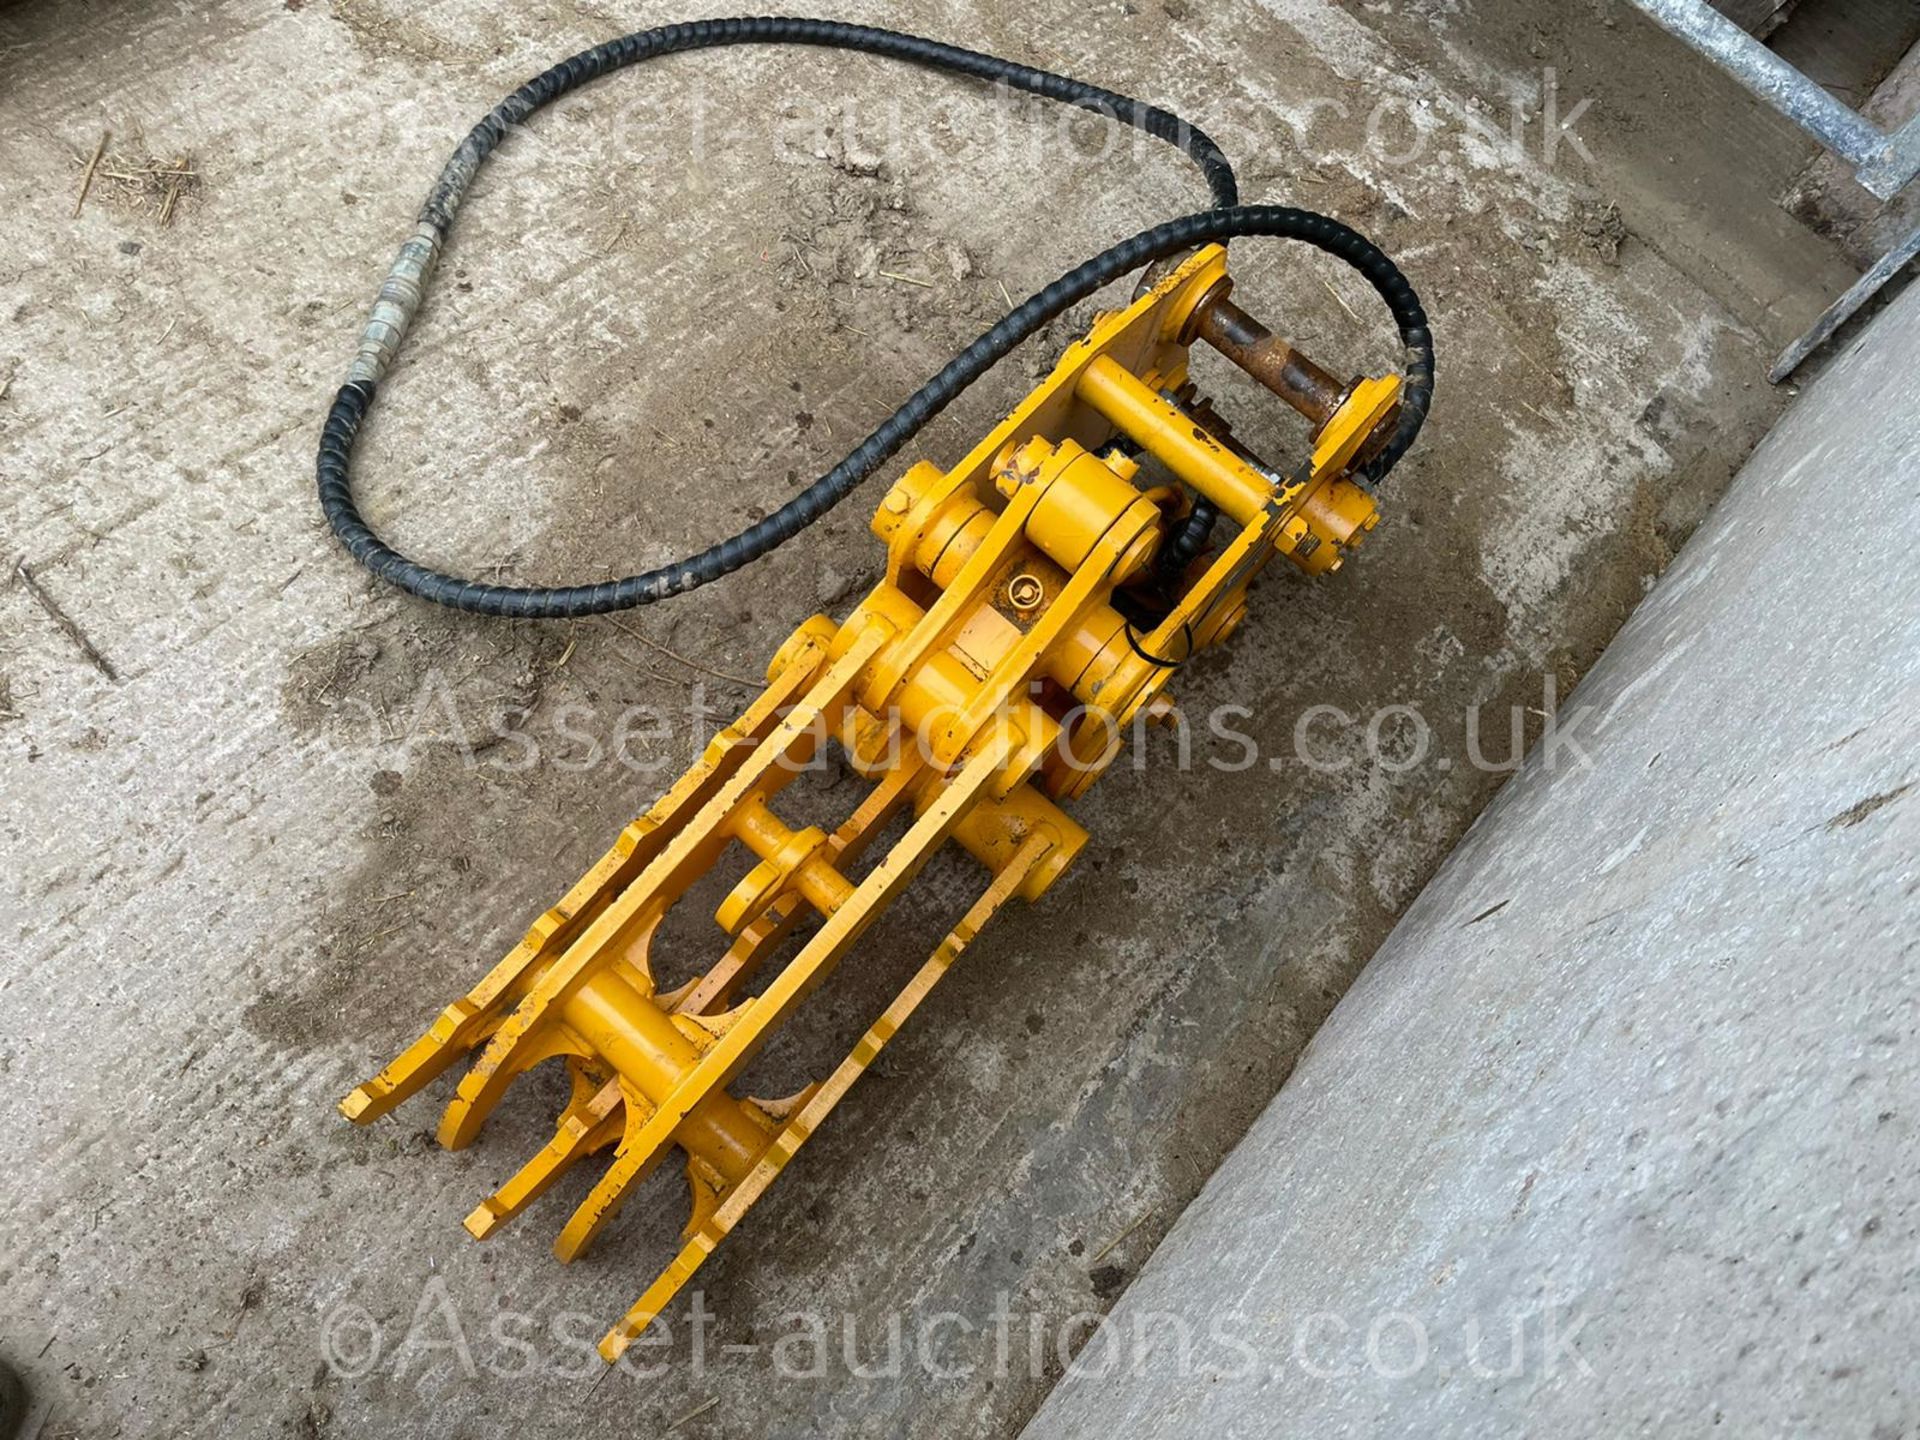 NEW AND UNUSED FINGER GRAB, HYDRAULIC DRIVEN, 35MM PINS *PLUS VAT* - Image 7 of 12